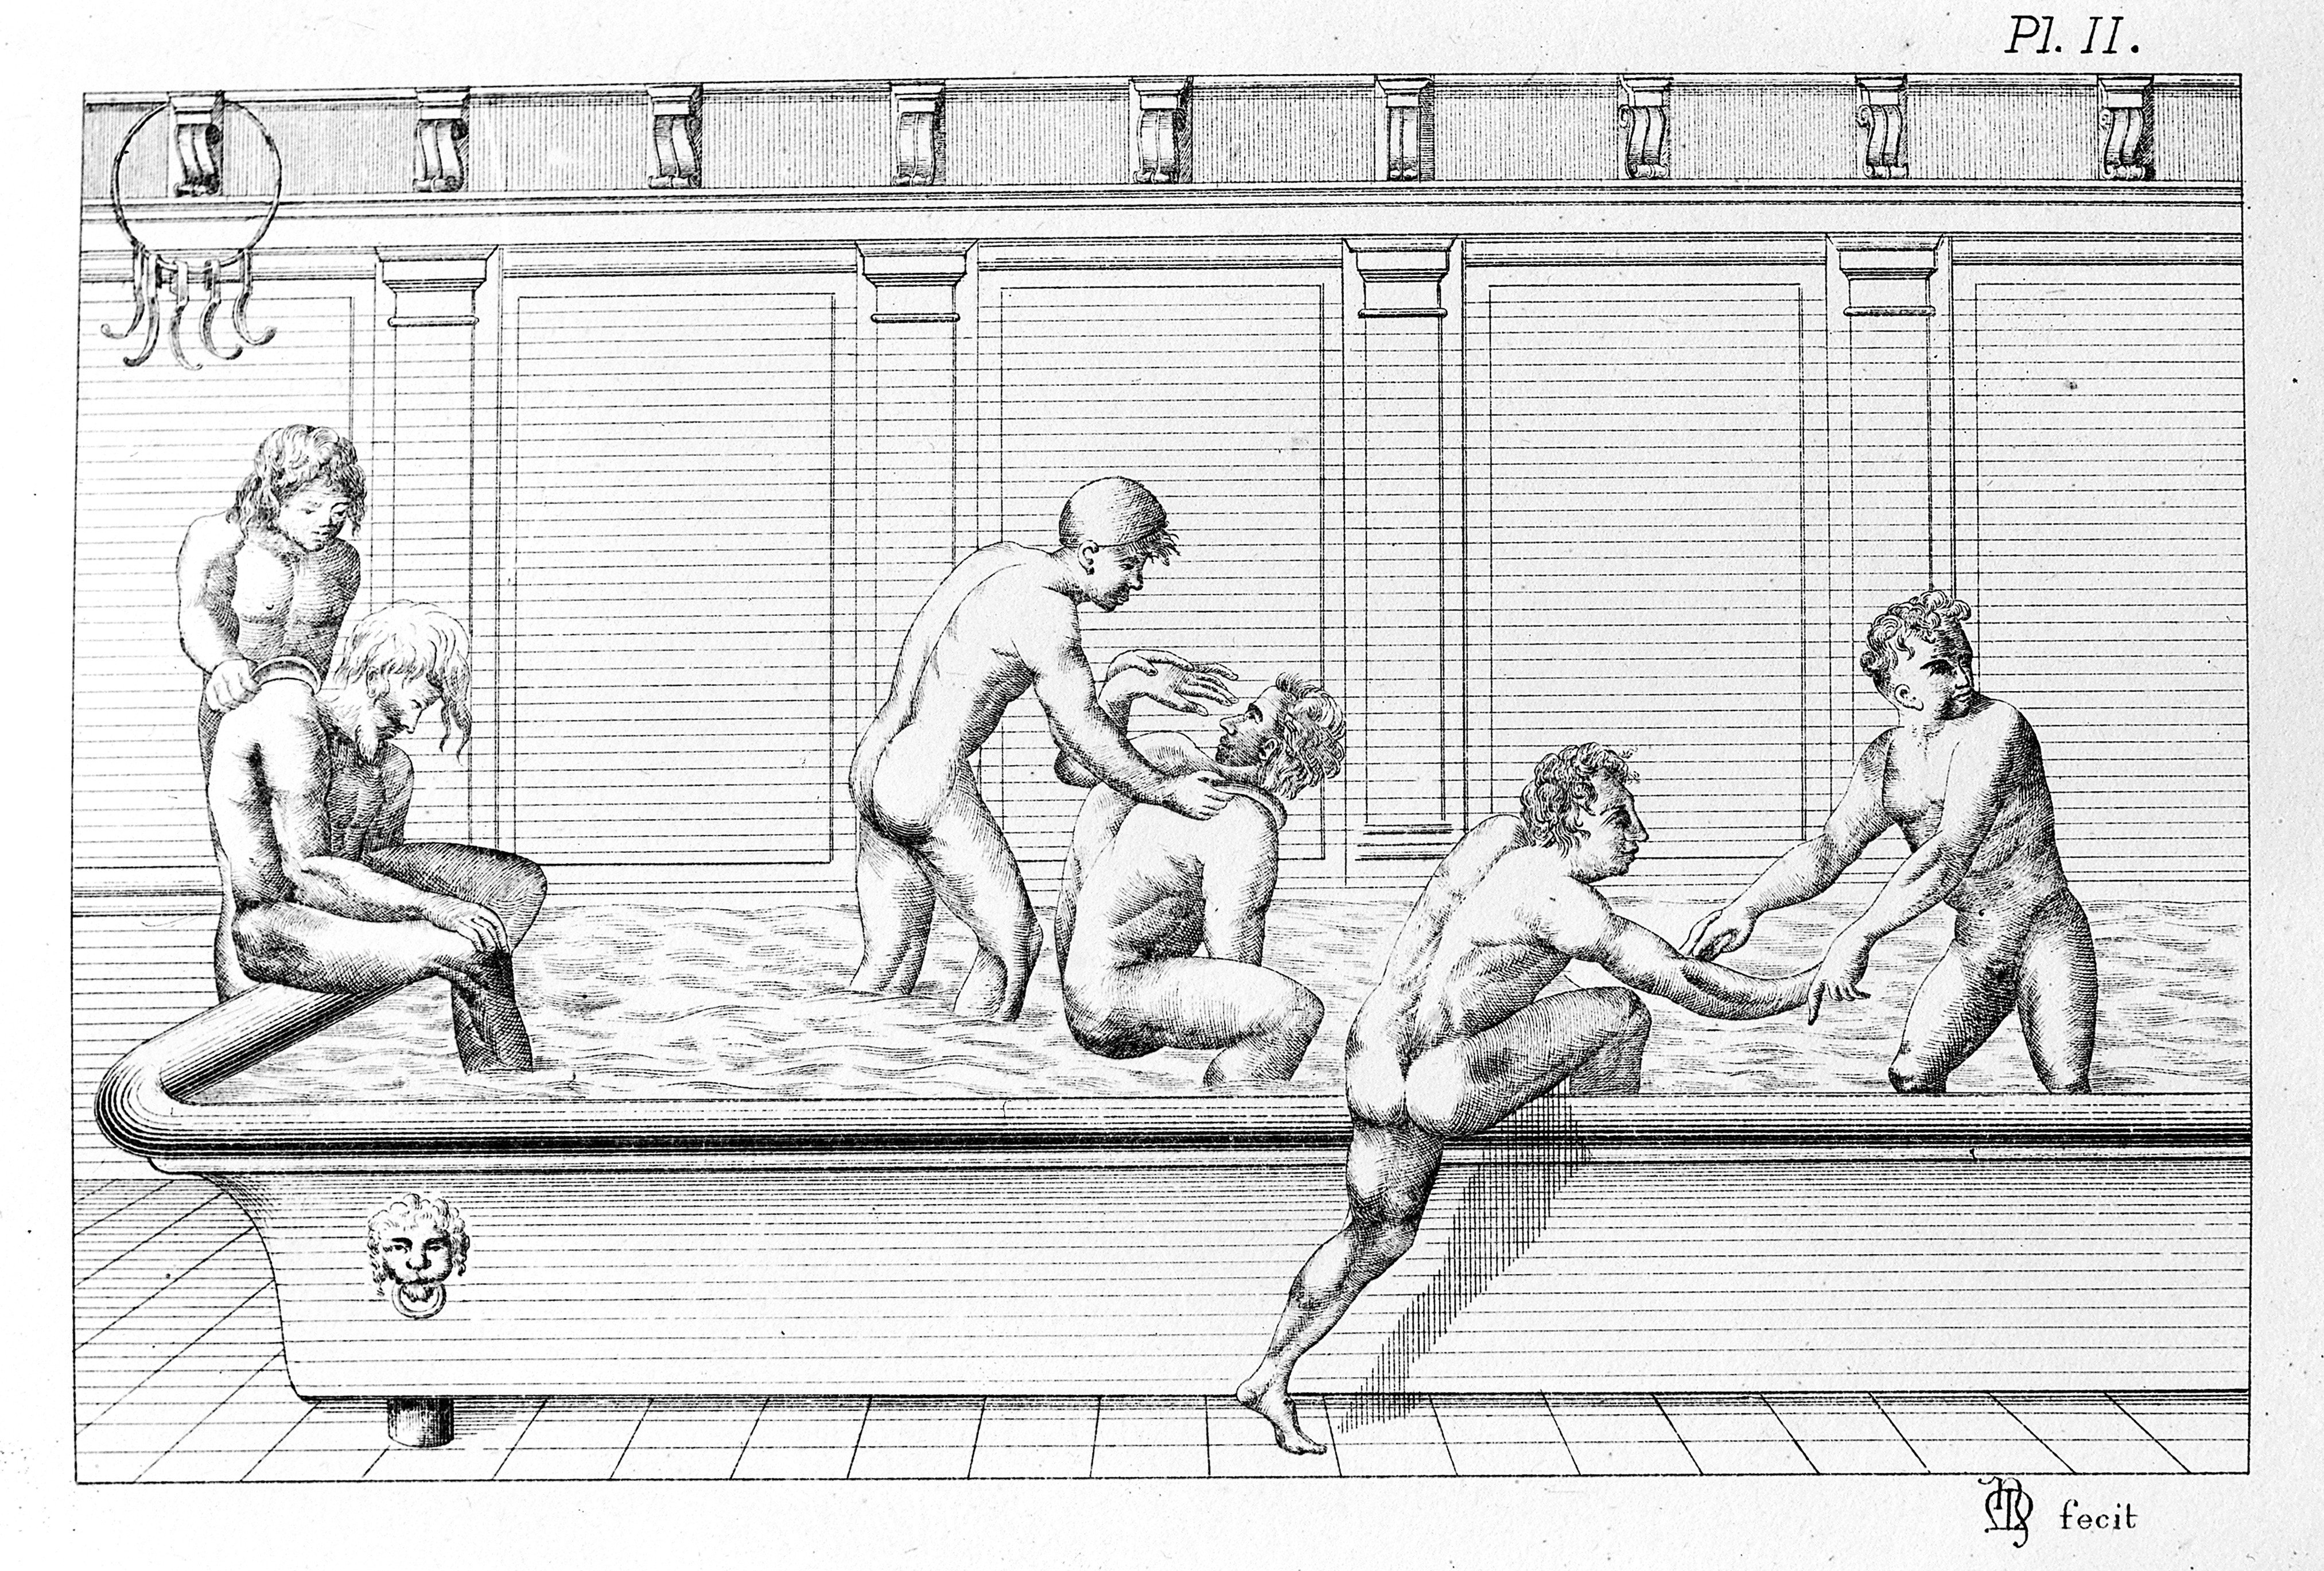 A group of men bathing and using strigils